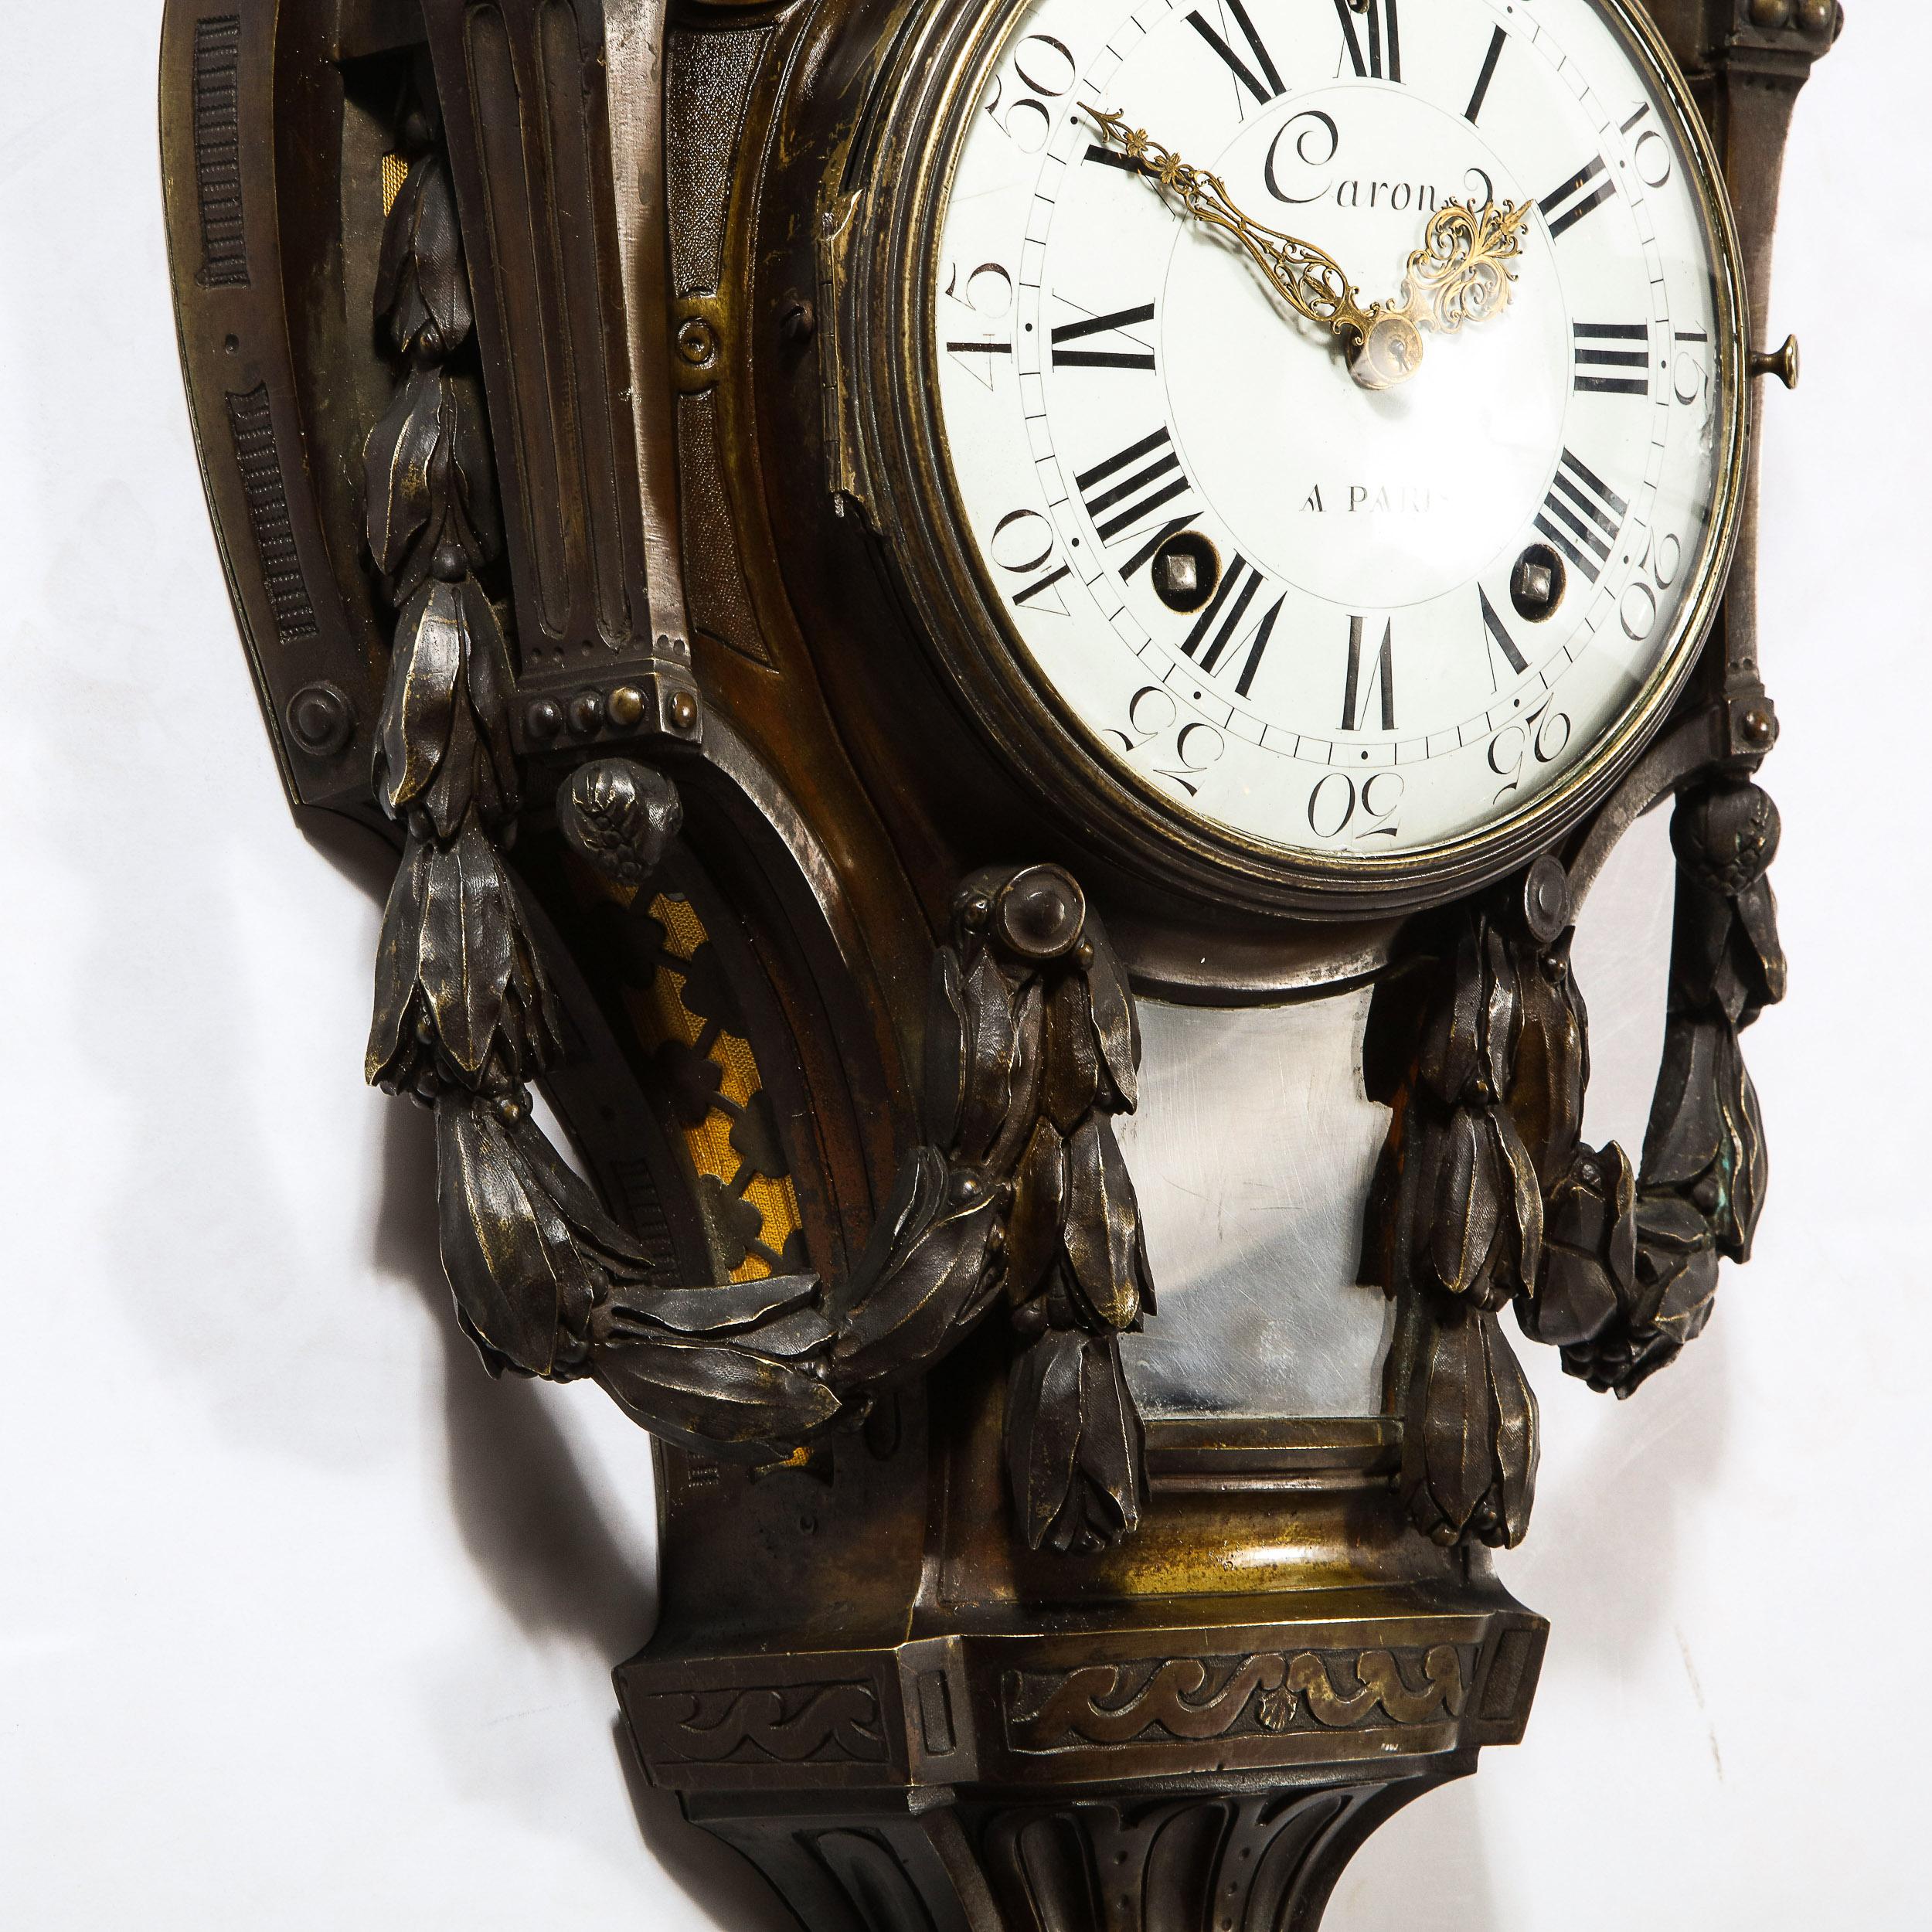 18th Century Neoclassical Bronze & Polished Brass Wall Clock w/ Chime by Caron 3